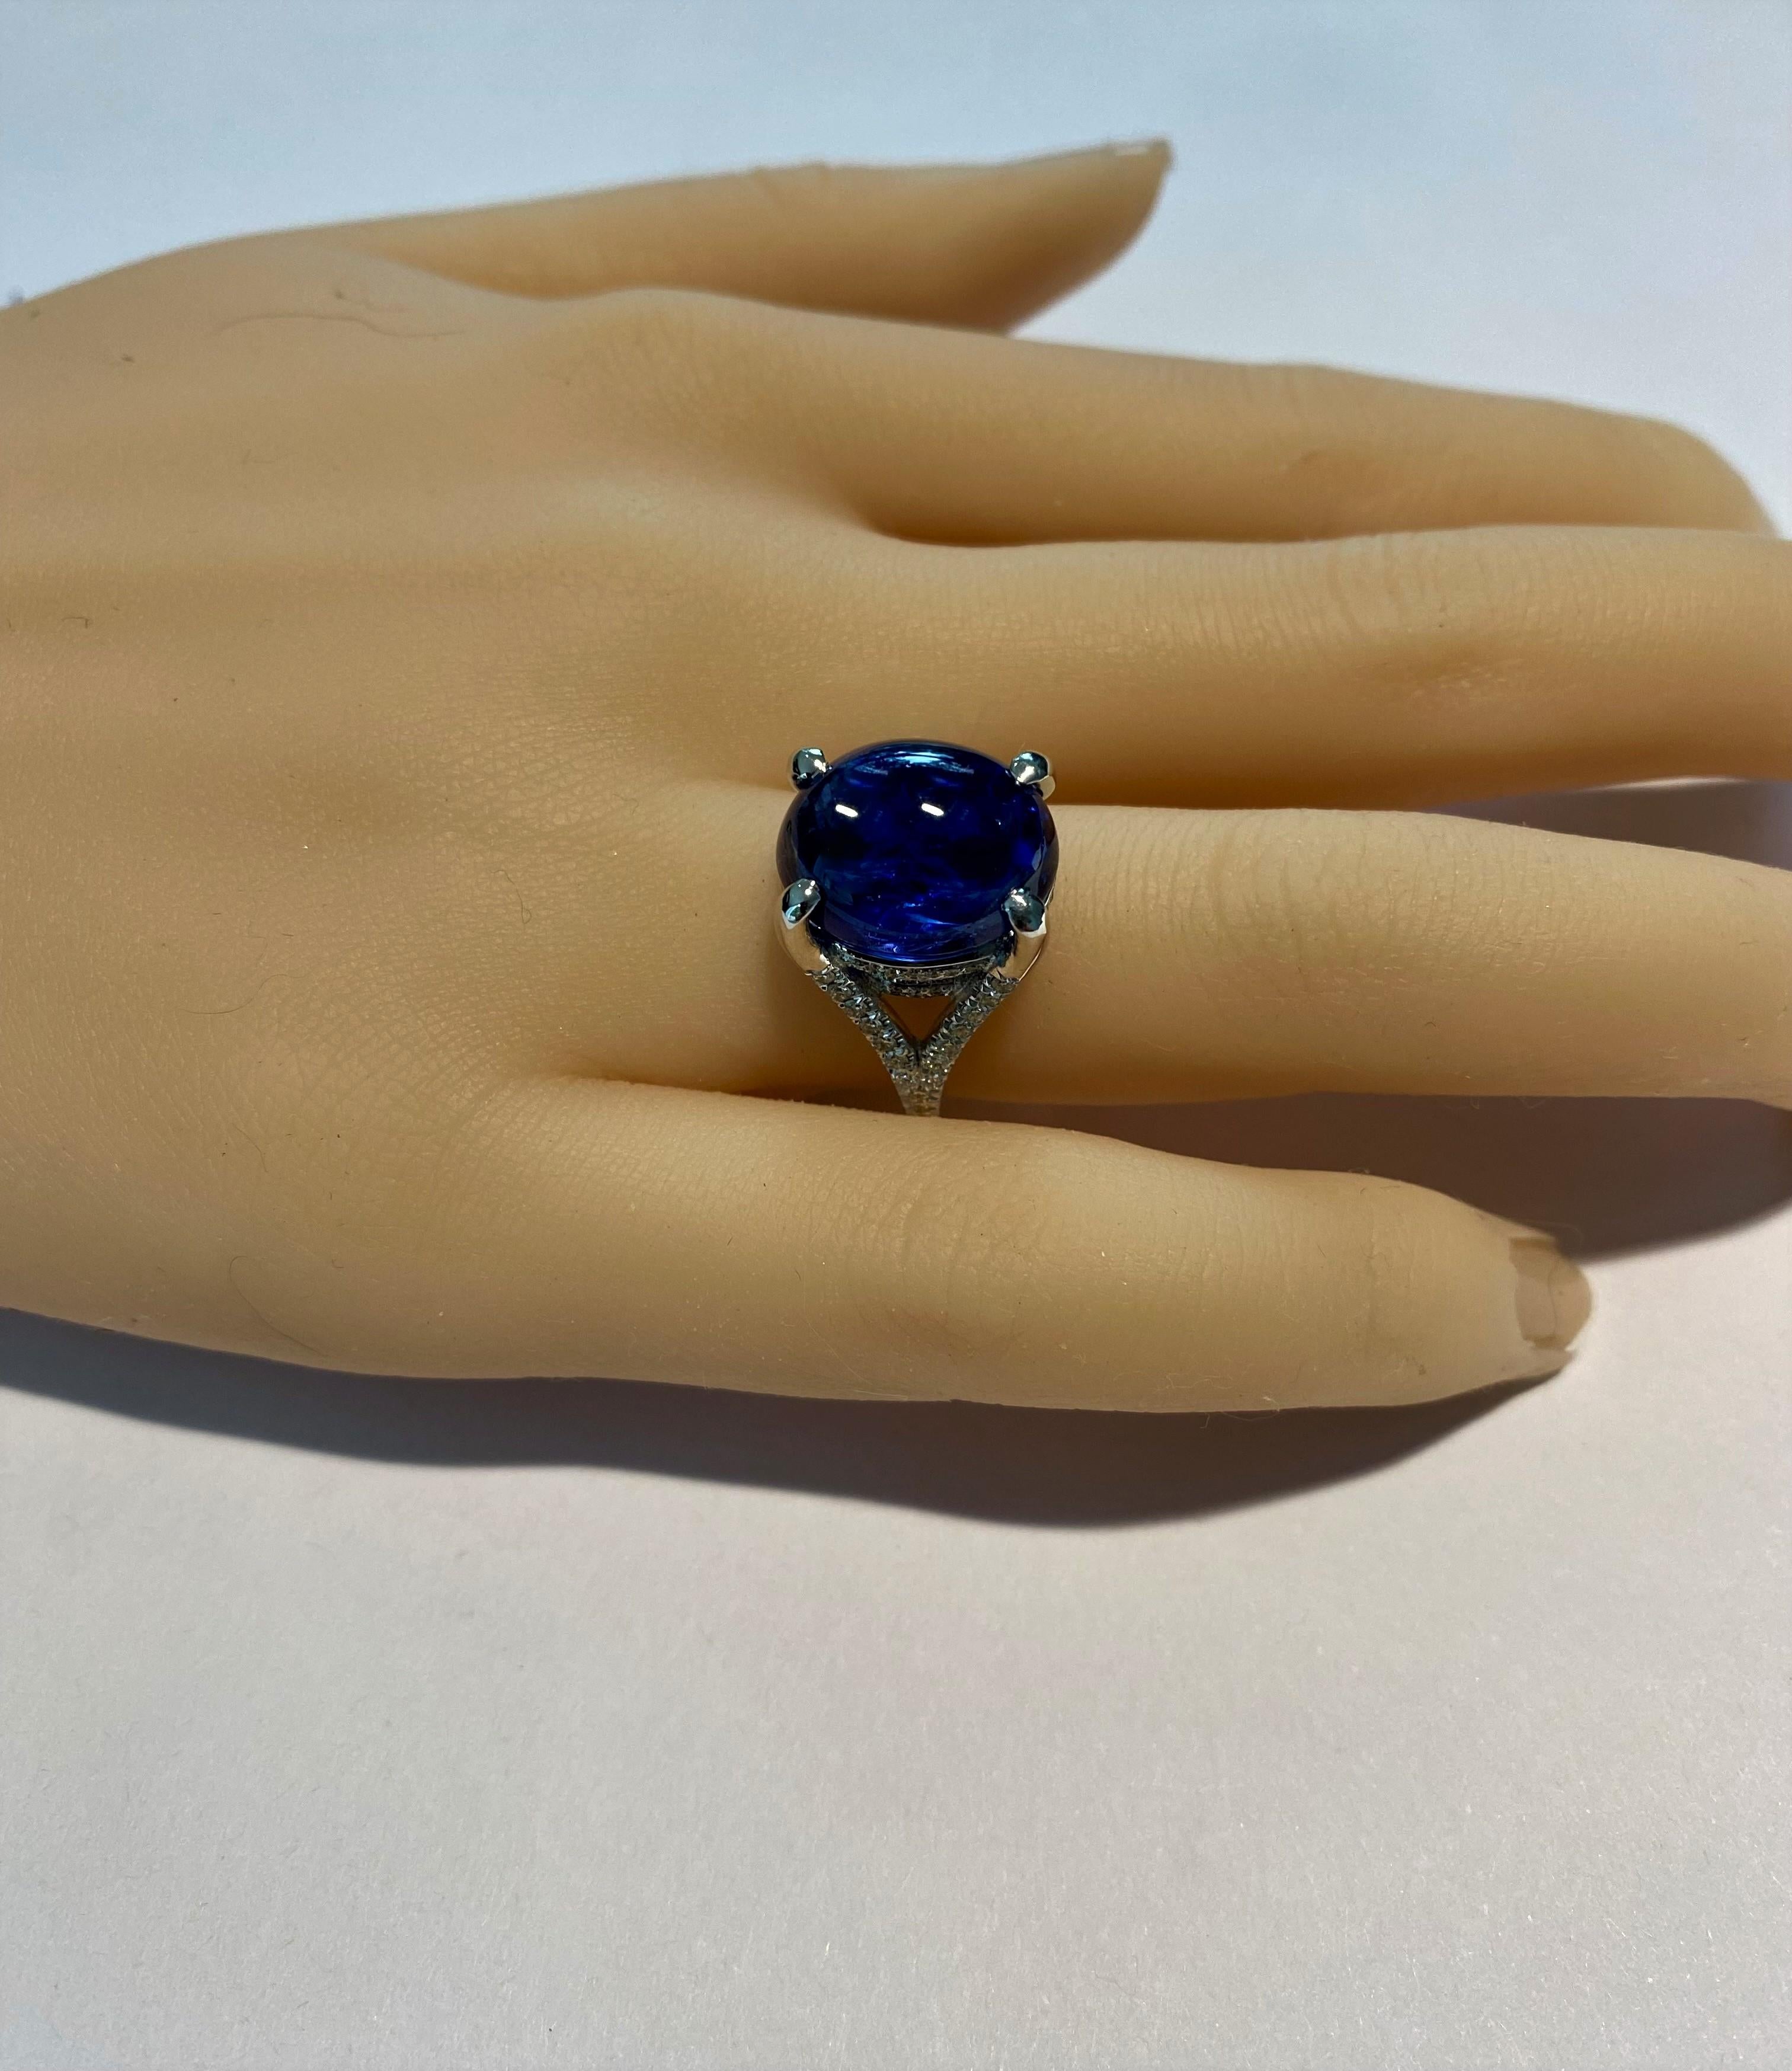 Oval Cut Ceylon Cabochon Sapphire Diamond Gold Cocktail Ring Weighing 17.77 Carats